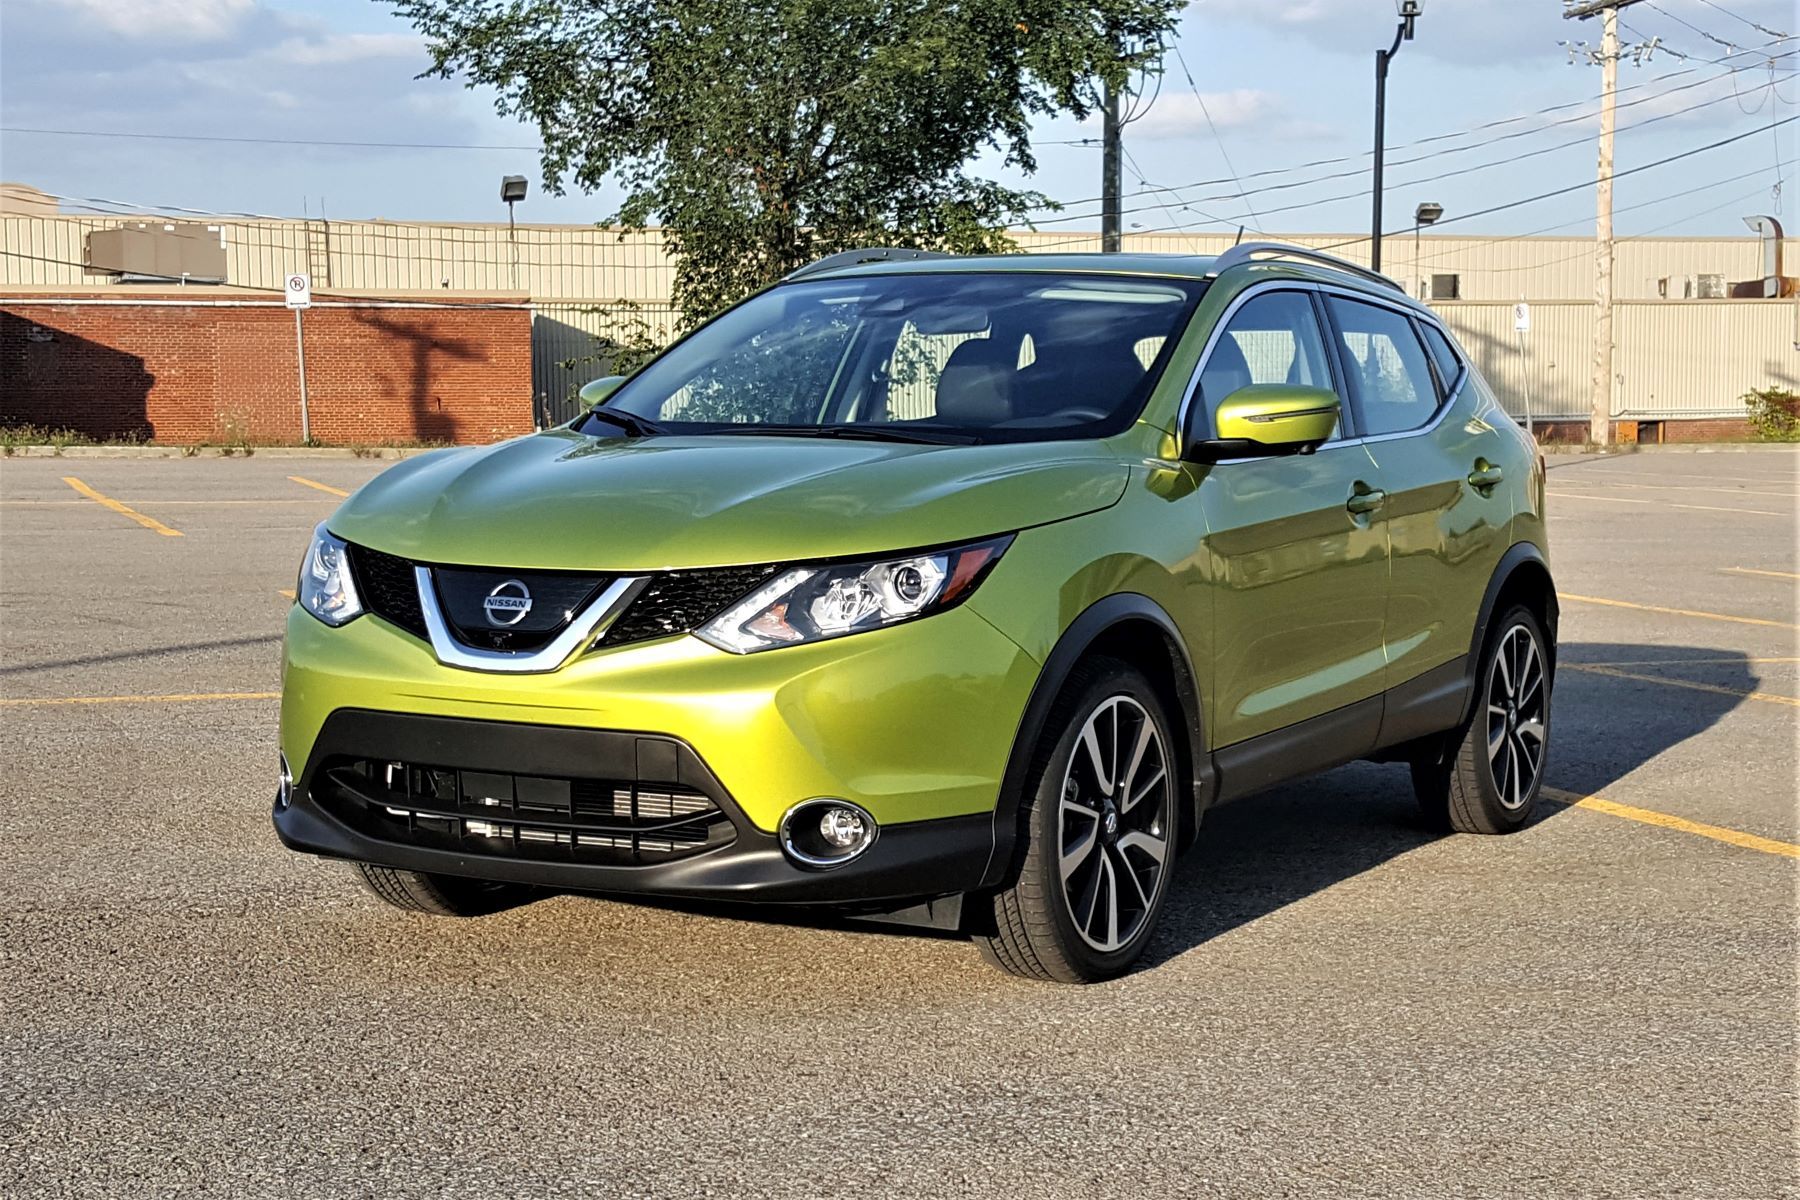 Nissan Qashqai Problems: Common Faults and Repair Costs